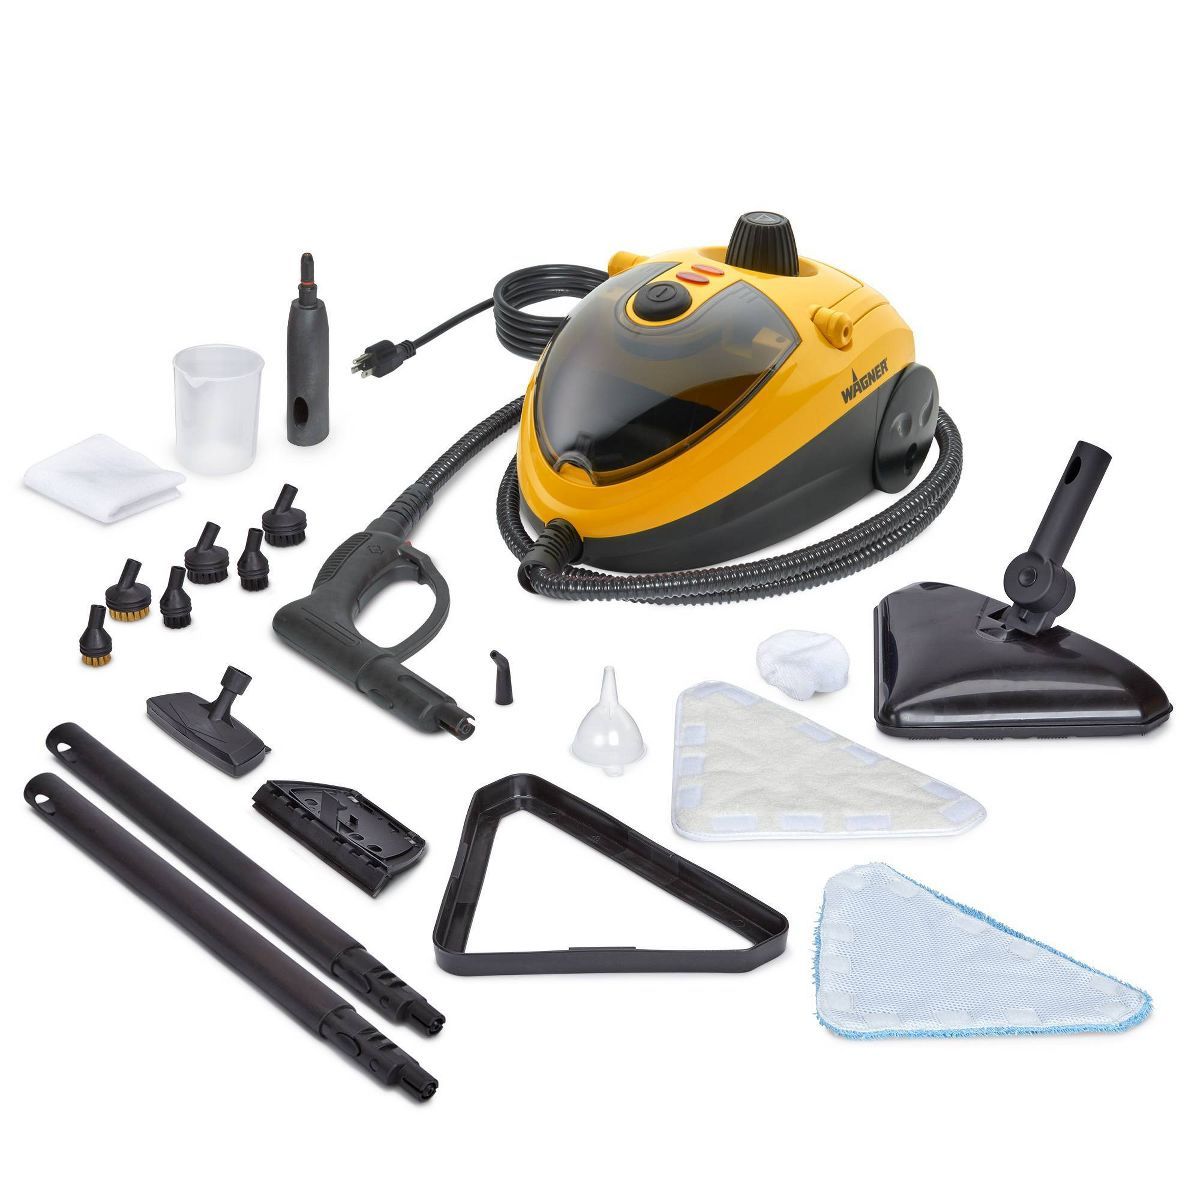 Wagner 925e Elite Steam Cleaner with 20 Accessories | Target